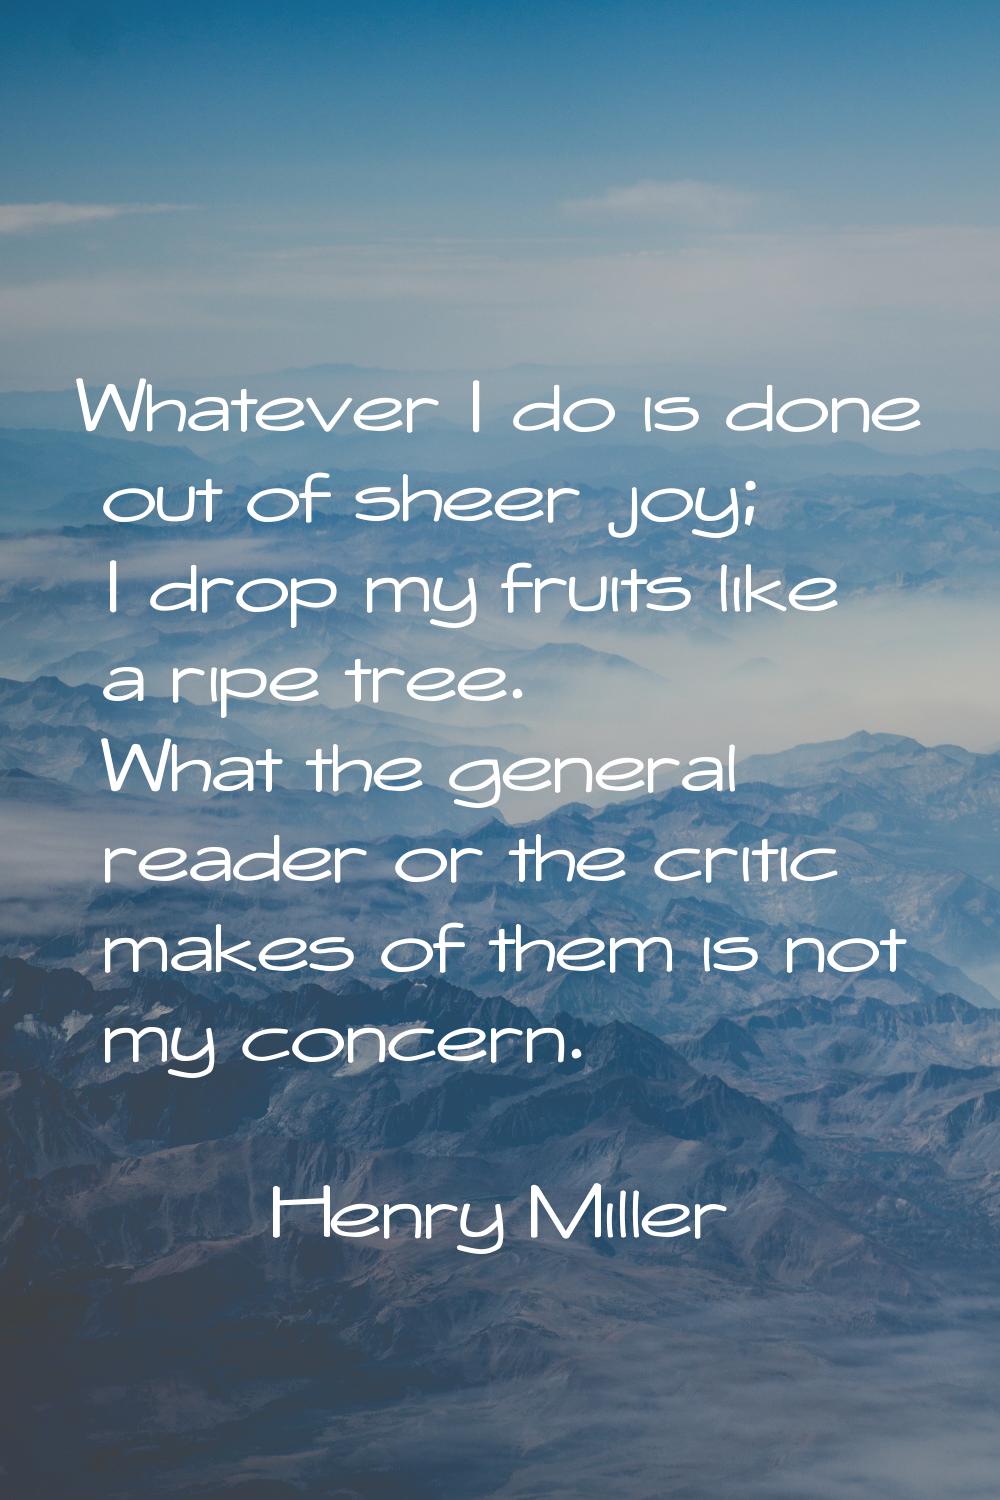 Whatever I do is done out of sheer joy; I drop my fruits like a ripe tree. What the general reader 